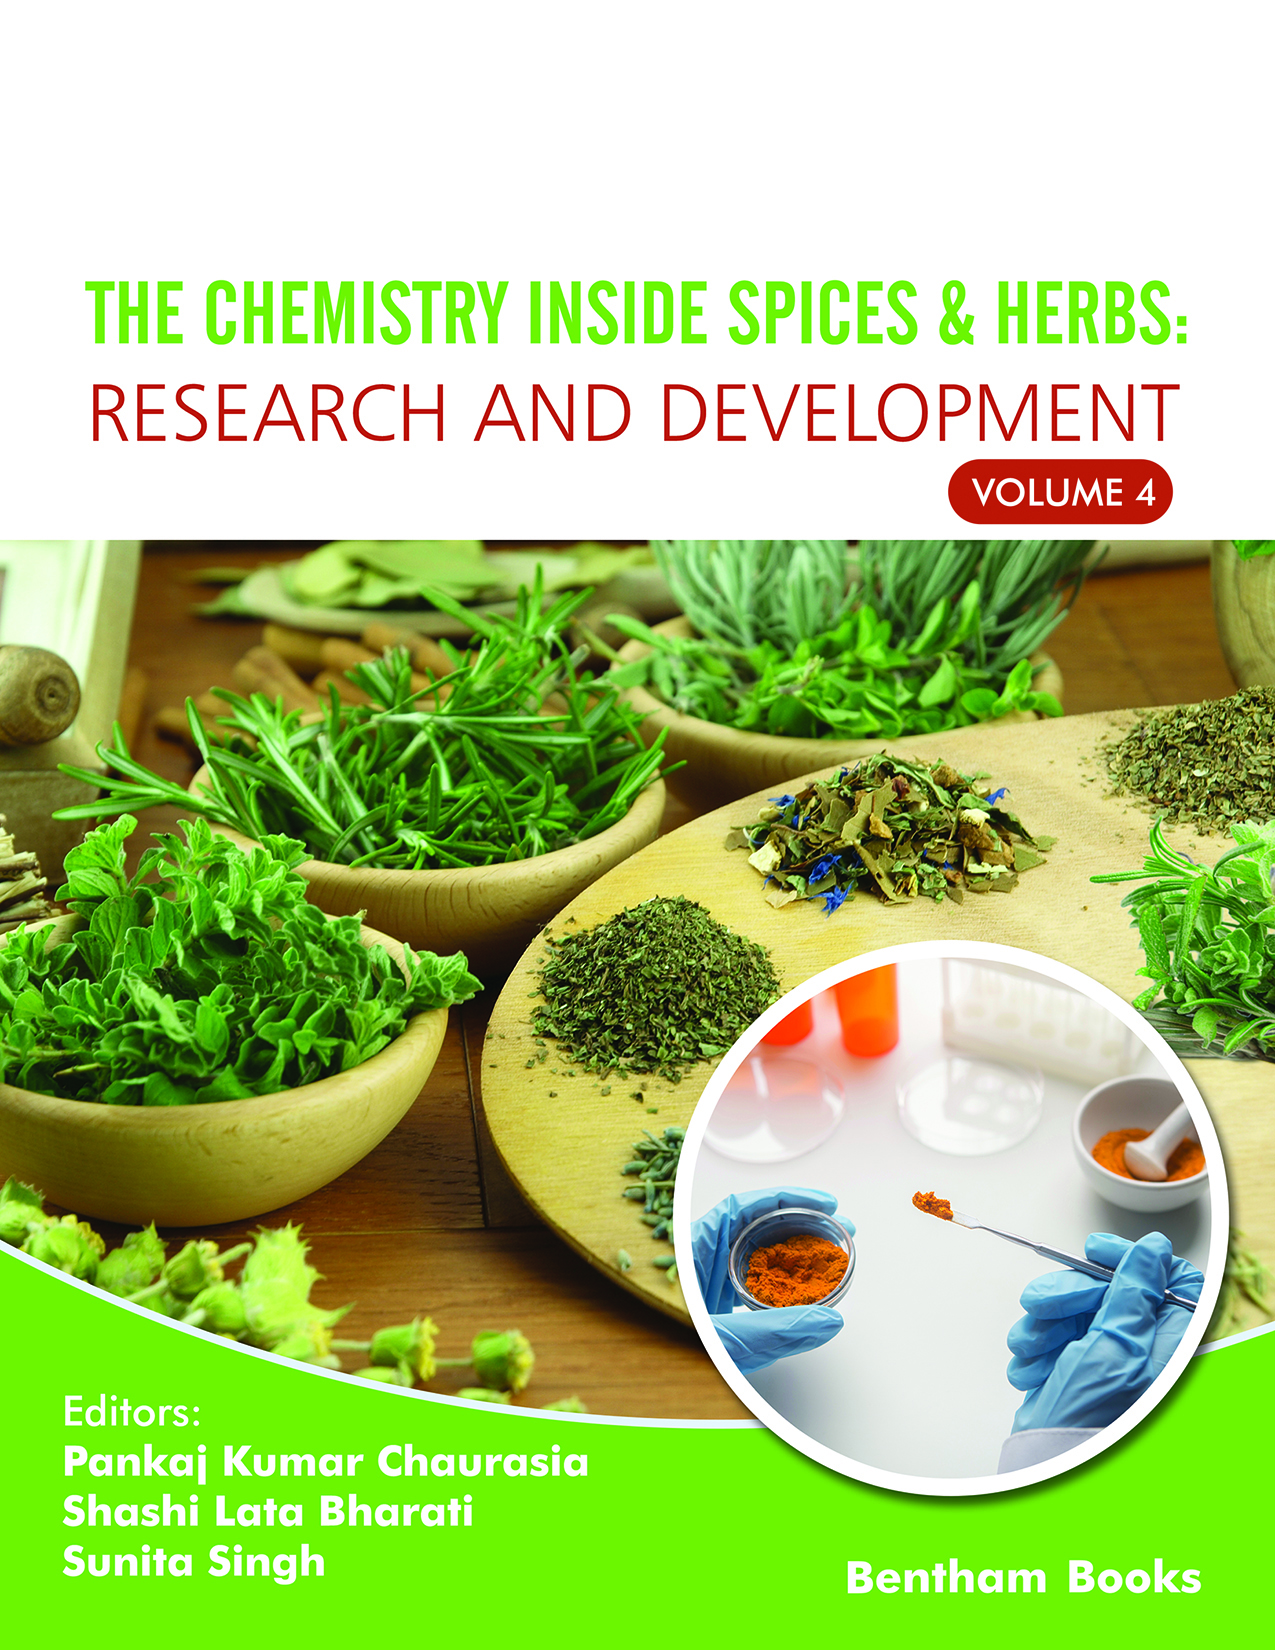 The Chemistry Inside Spices & Herbs: Research and Development